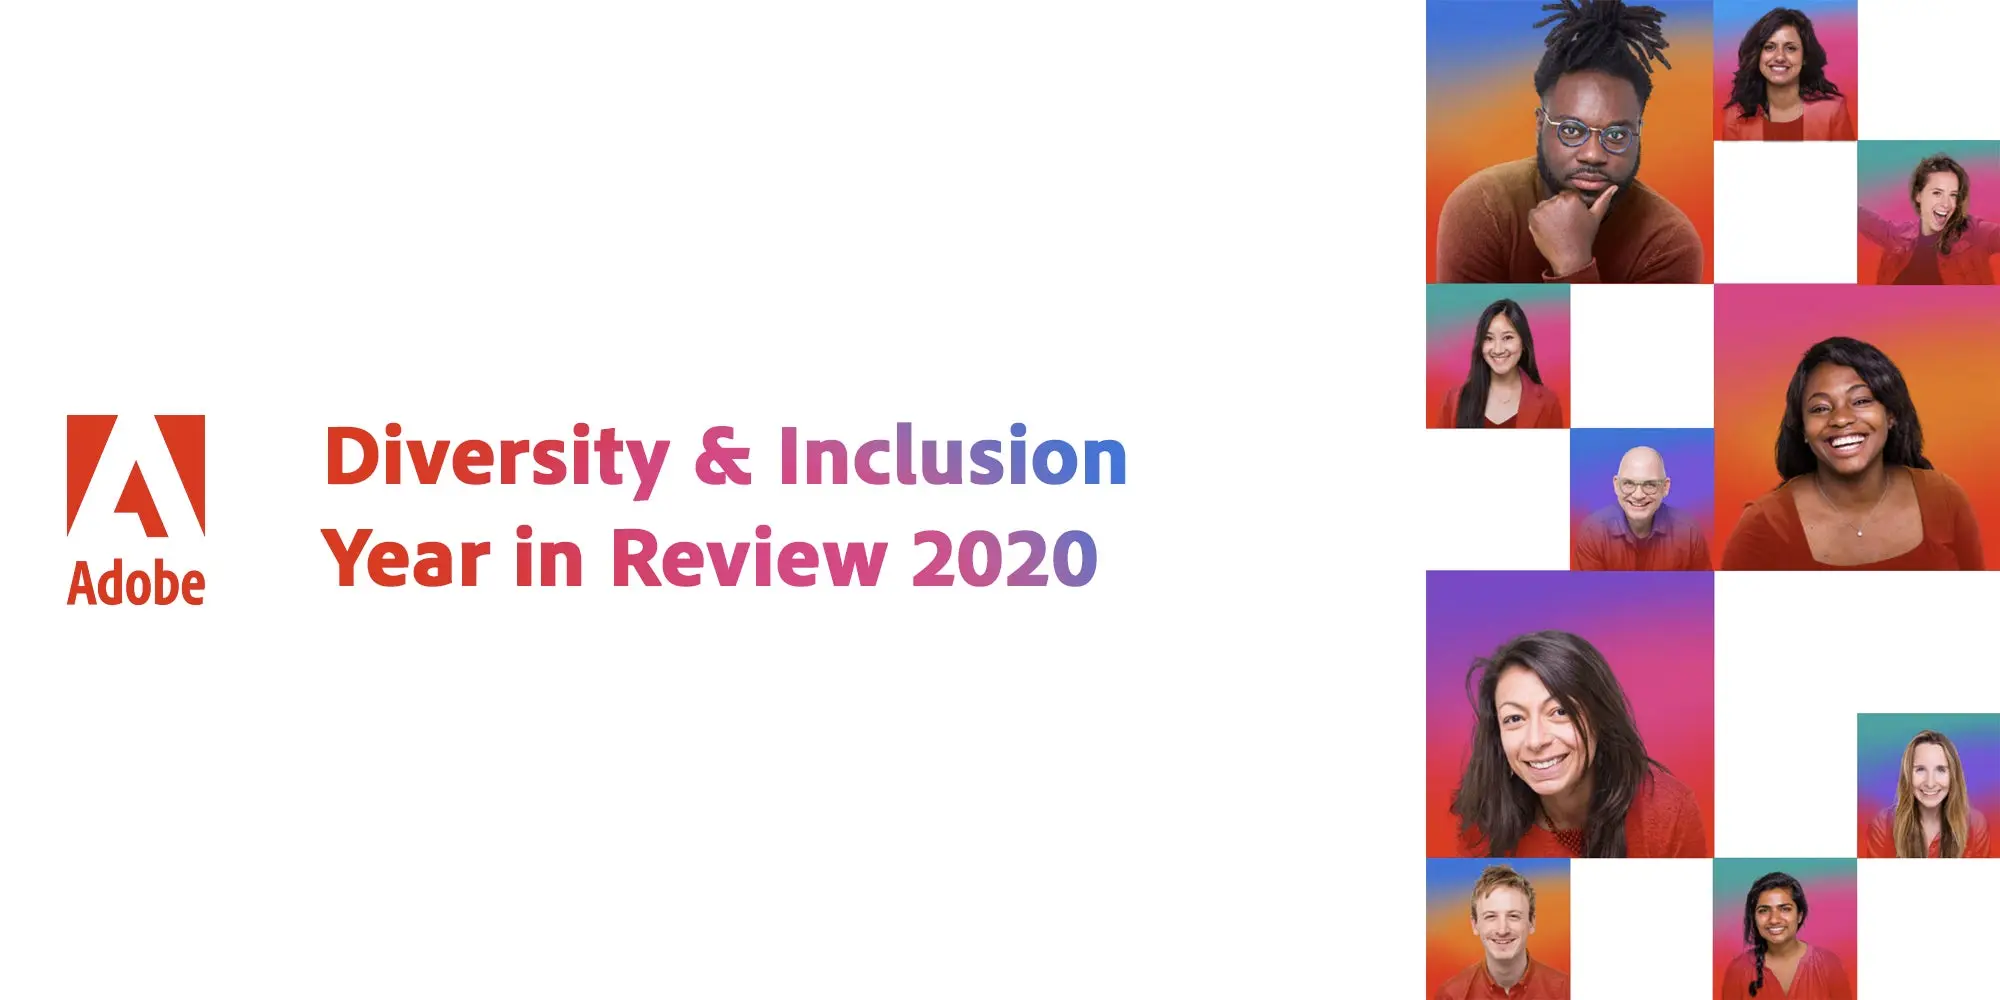 Adobe’s FY2020 Diversity & Inclusion Year in Review   